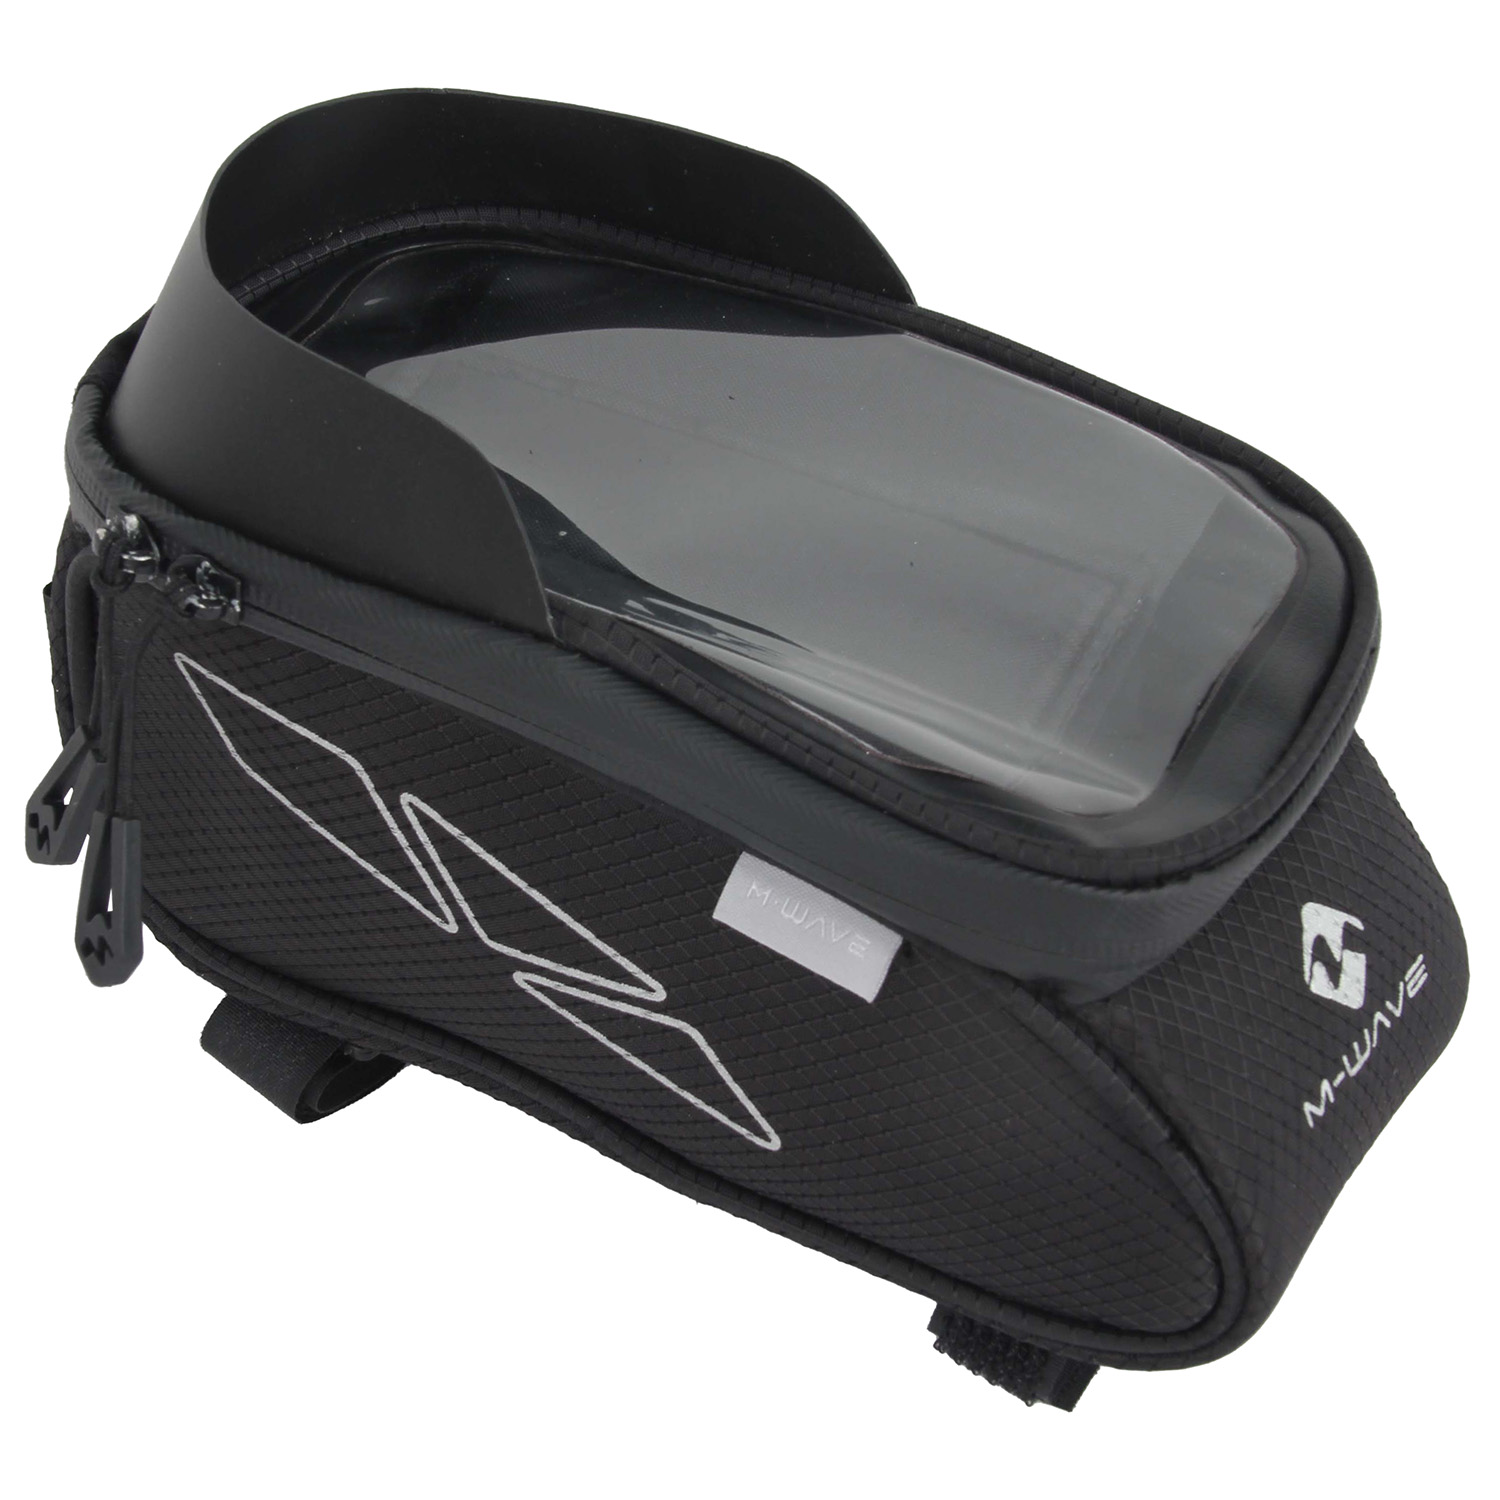 M-WAVE Top XL SC top bag | Messingschlager